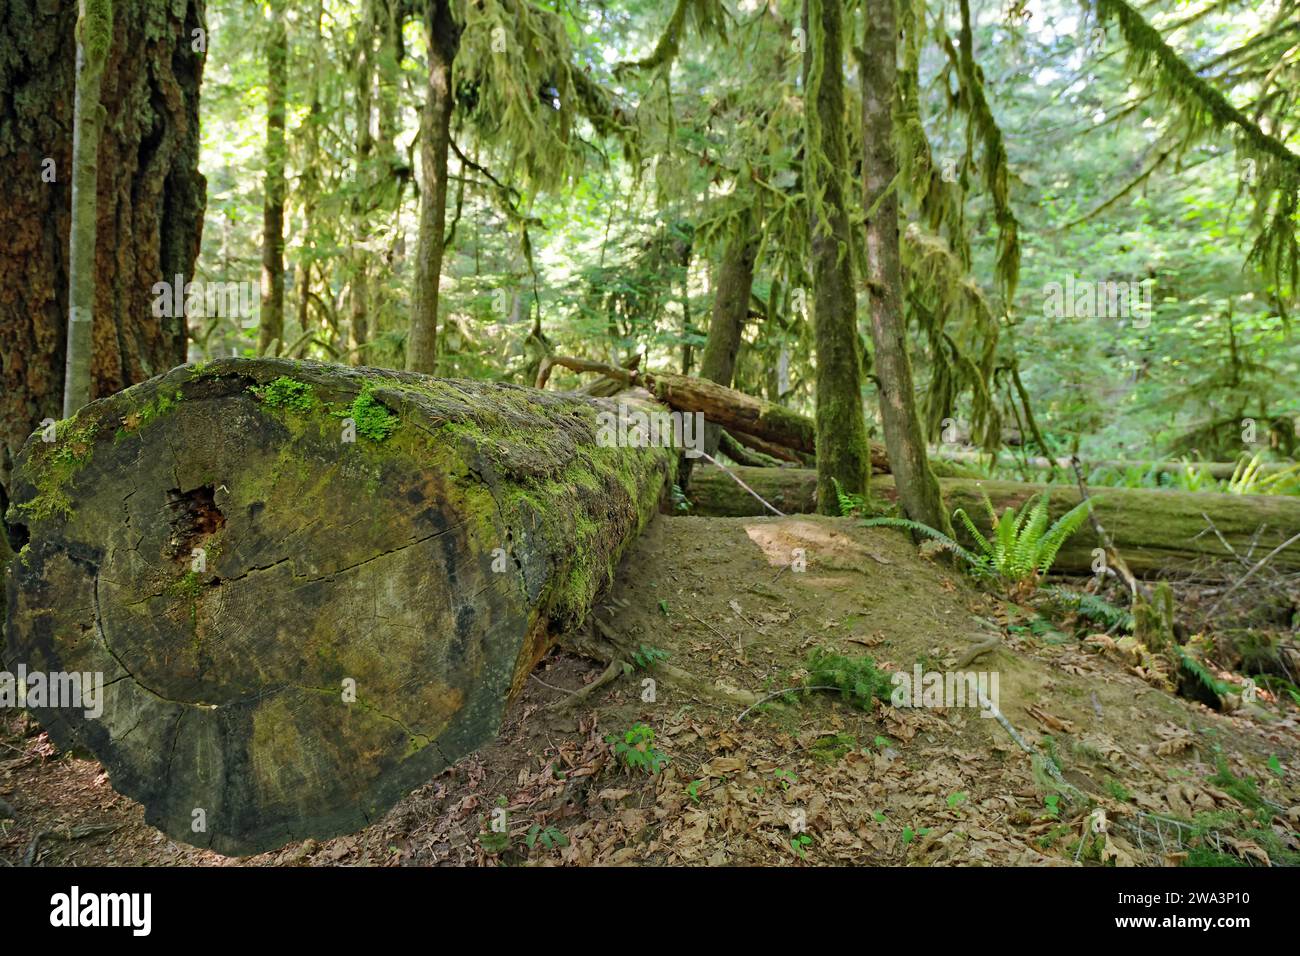 Moss-covered tree trunk of a Douglas fir, dense beard lichen, Cathedral Grove, Vancouver Island, British Columbia, Canada, North America Stock Photo